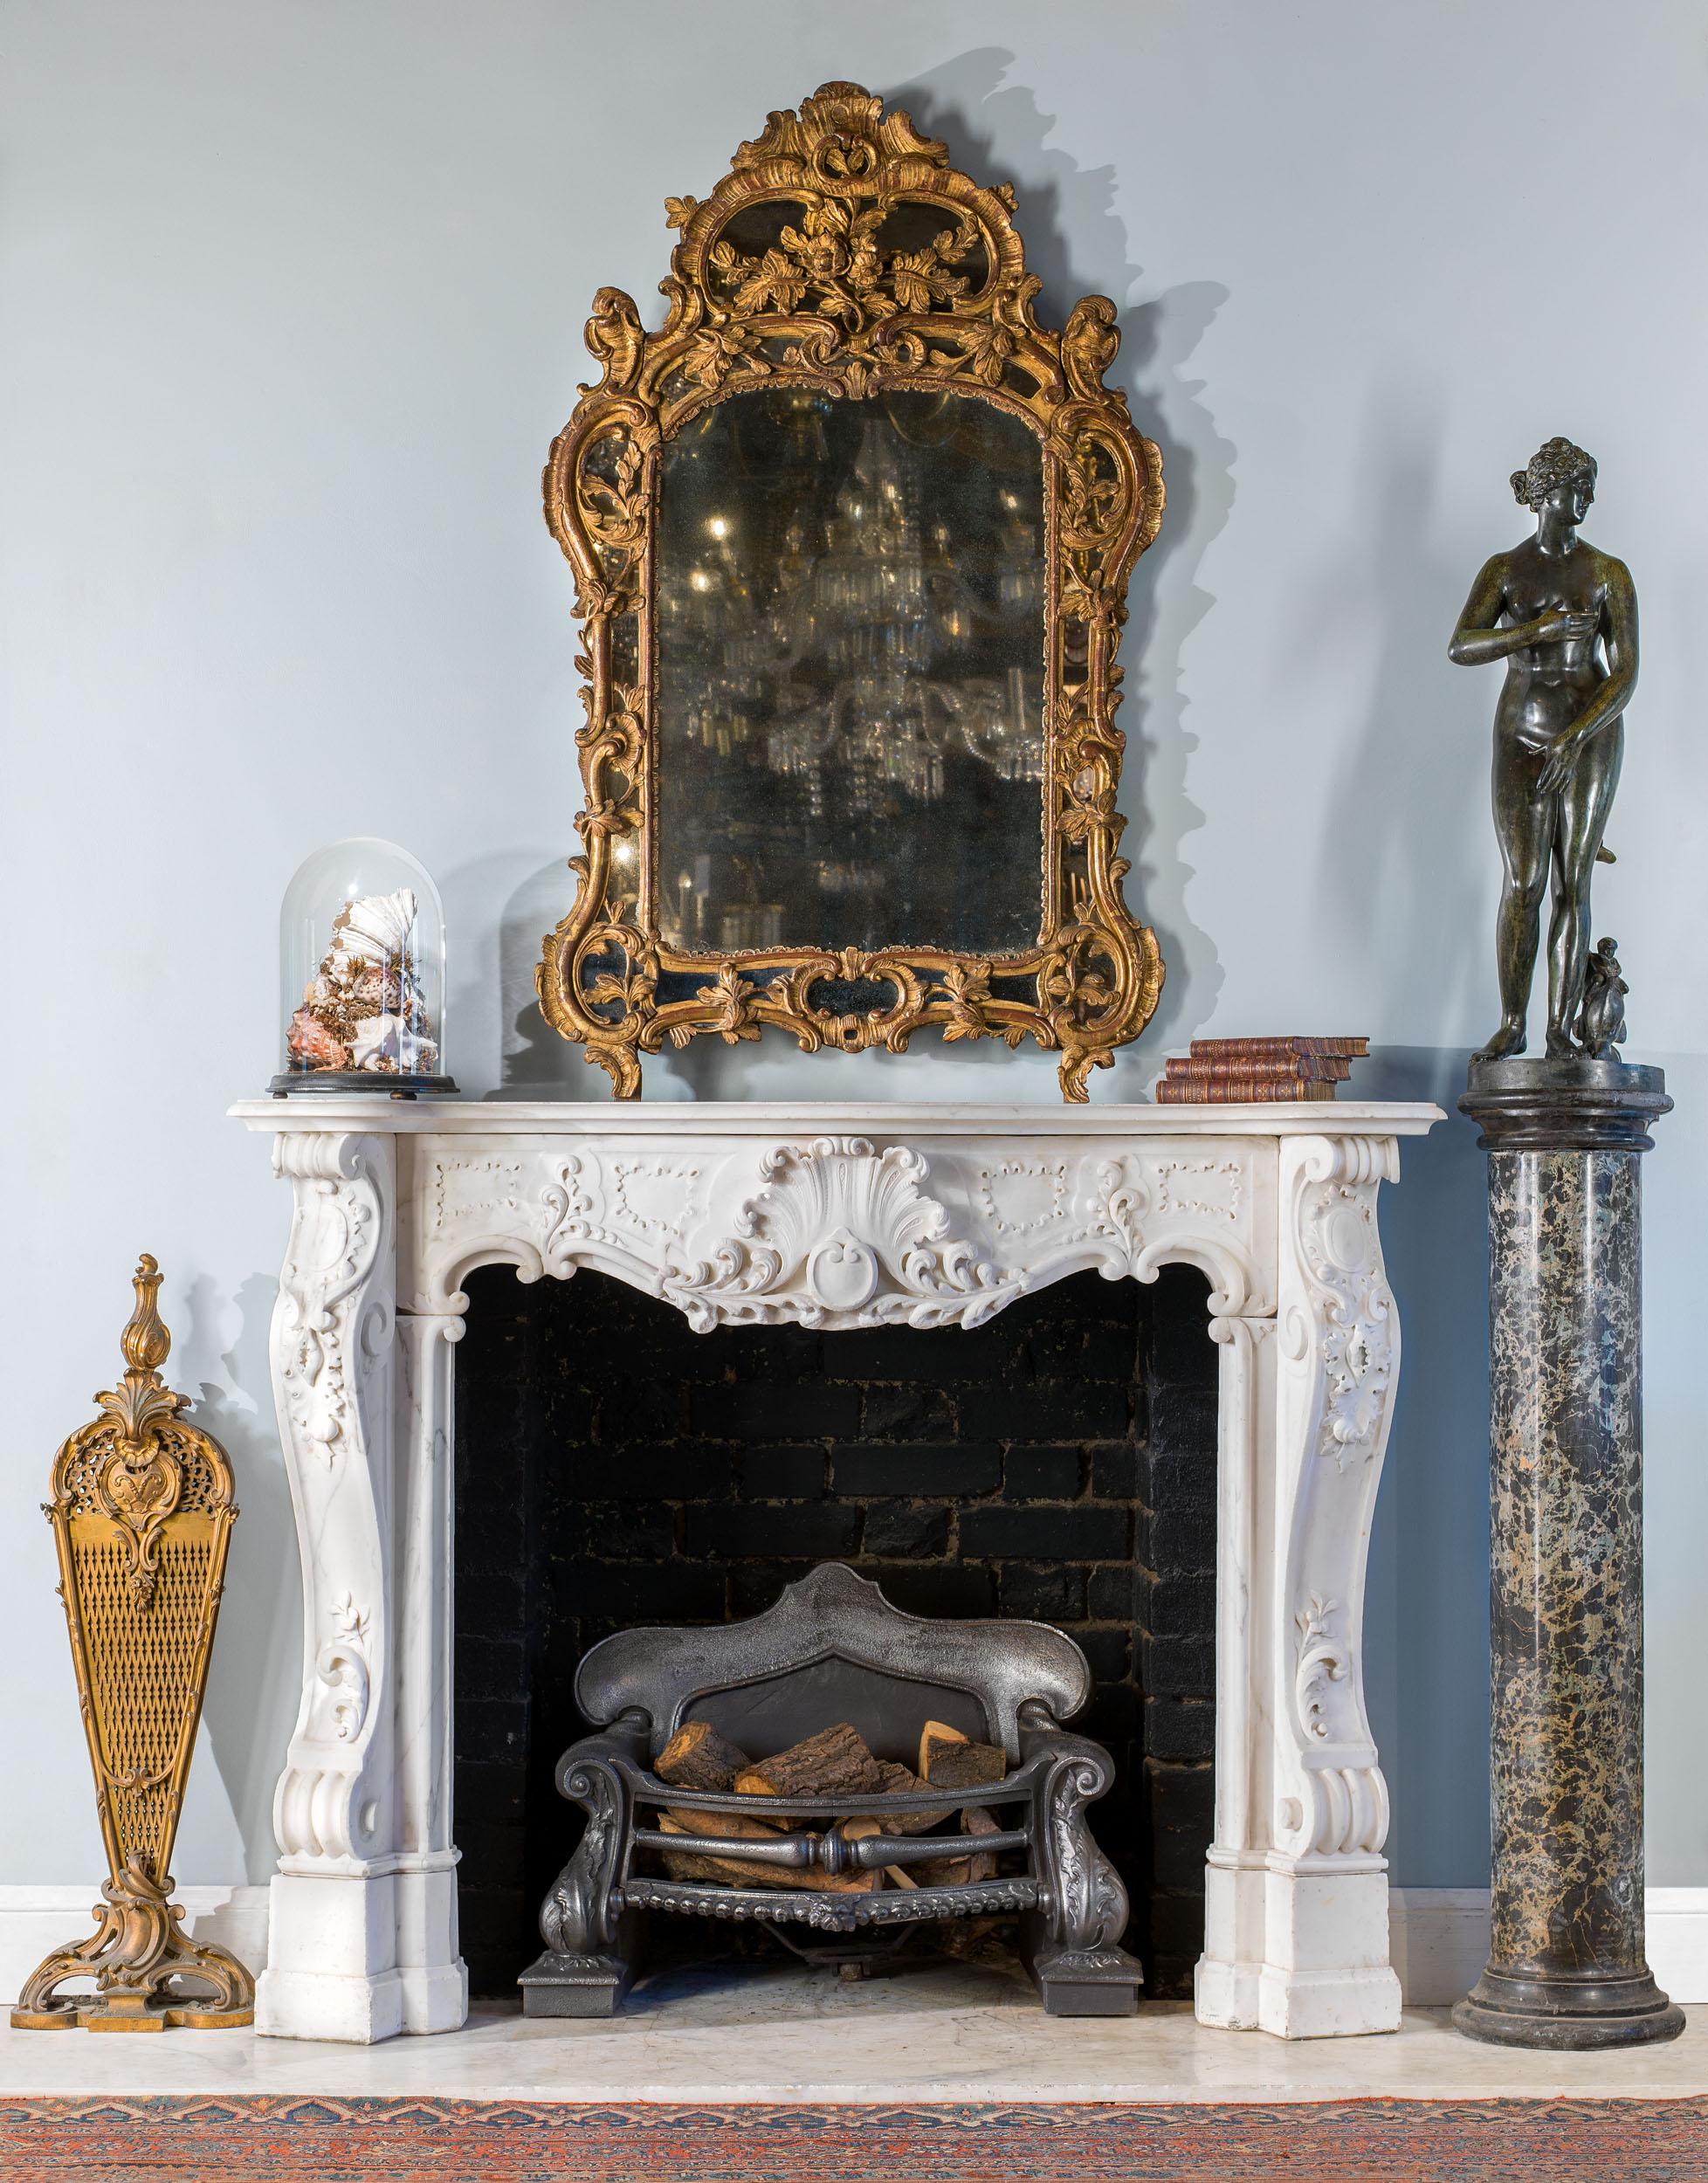 A fine French giltwood wall mirror, the gilded frame carved with scrolls and foliate flourishes over a wide mirrored border.

Southern French (possibly Provence), circa 1770 with restorations.
 